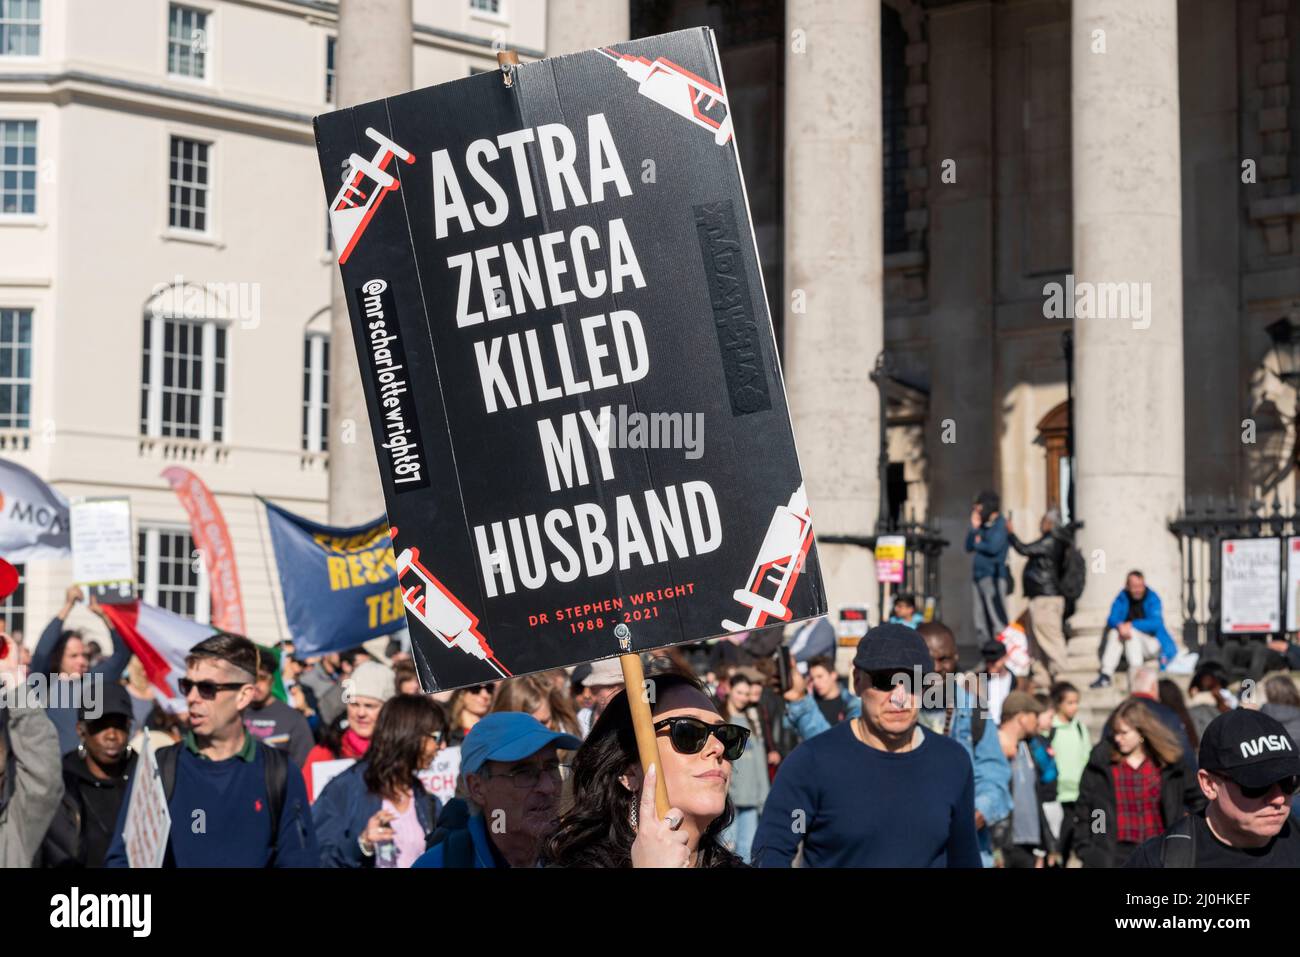 Westminster, London, UK. 19th Mar, 2022.A protest is taking place against vaccinating children for Covid 19, joined by anti-vaxxers. Female with placard stating Astra Zeneca killed my husband Stock Photo